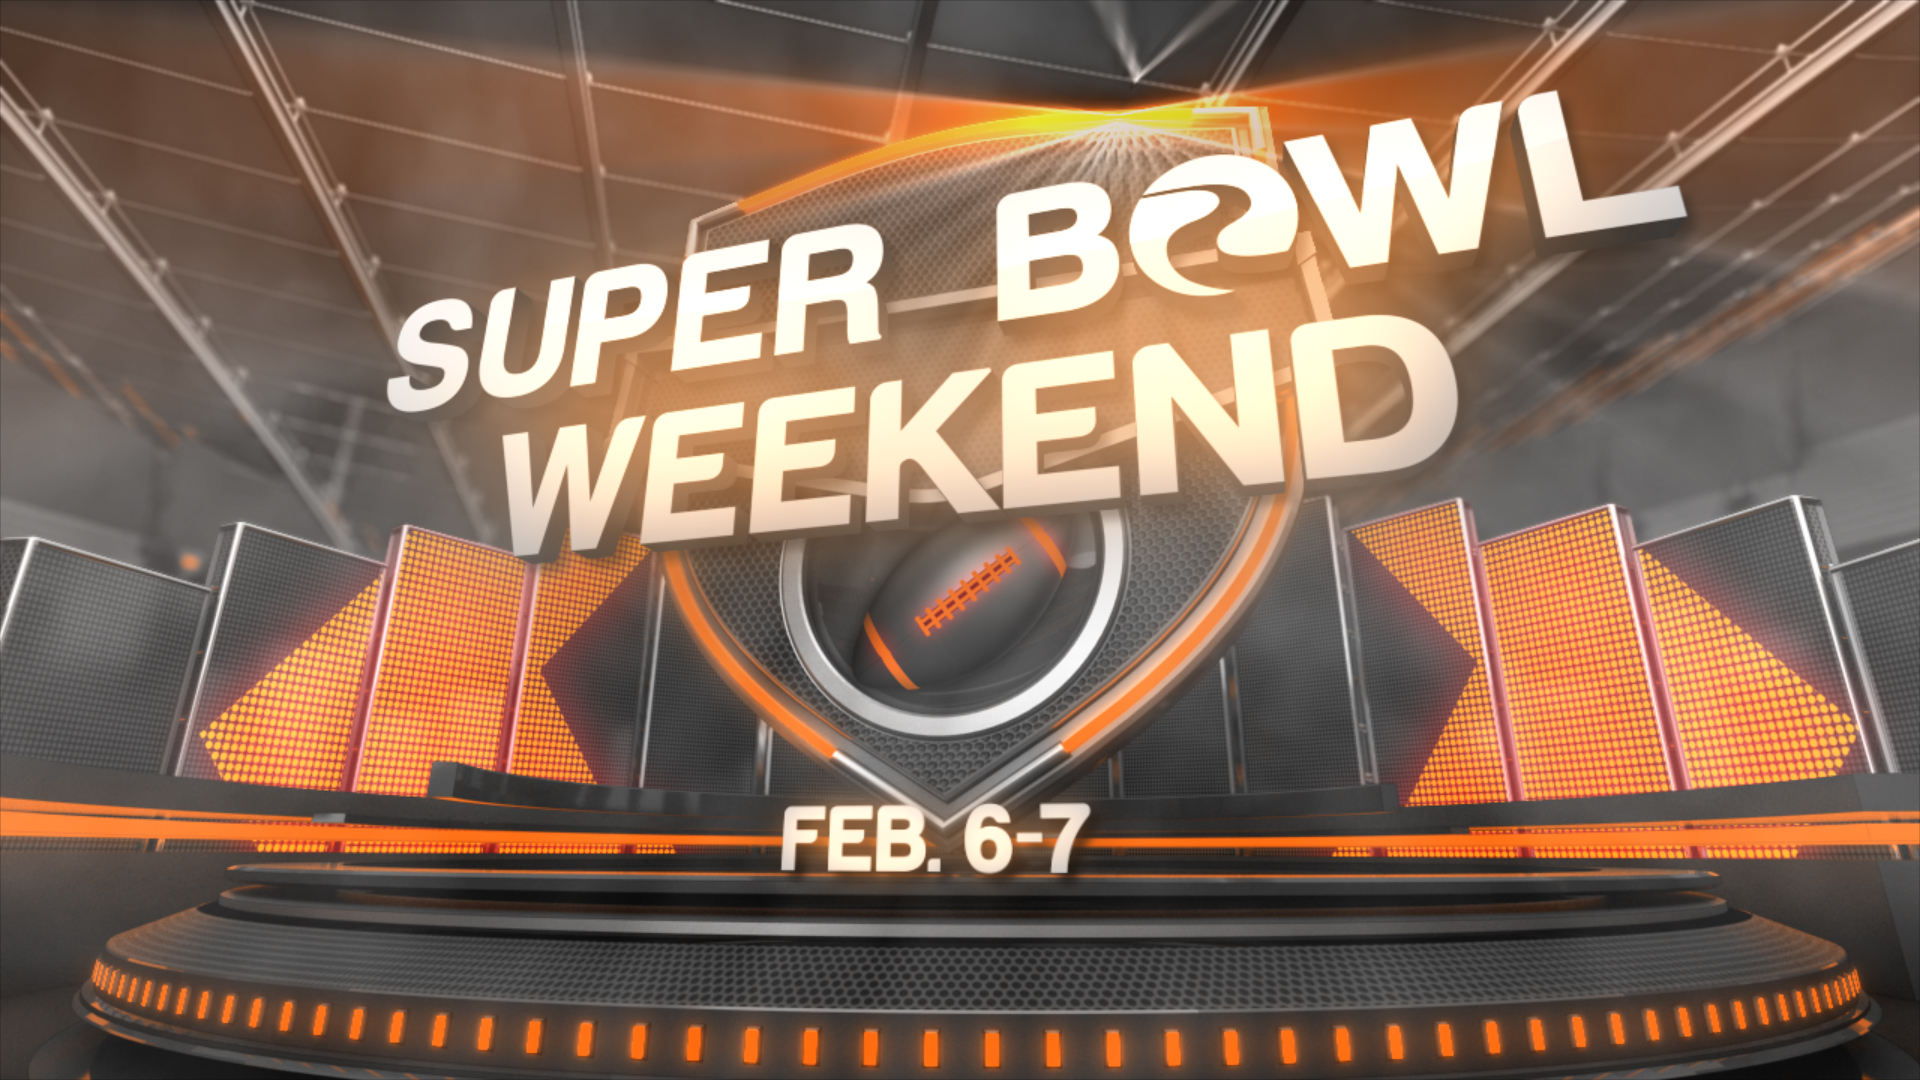 Super Bowl Weekend Graphic 16x9